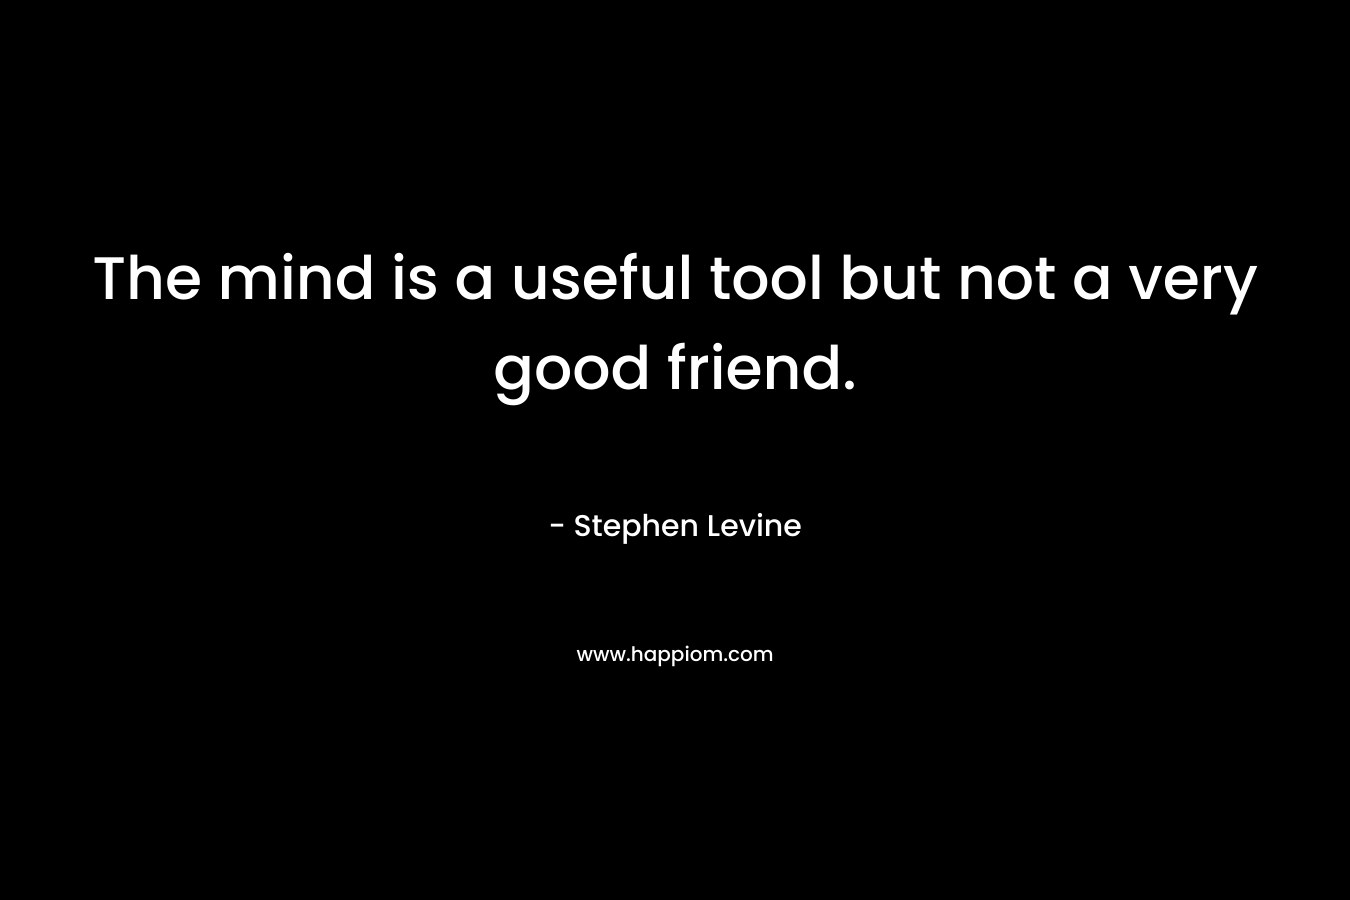 The mind is a useful tool but not a very good friend.